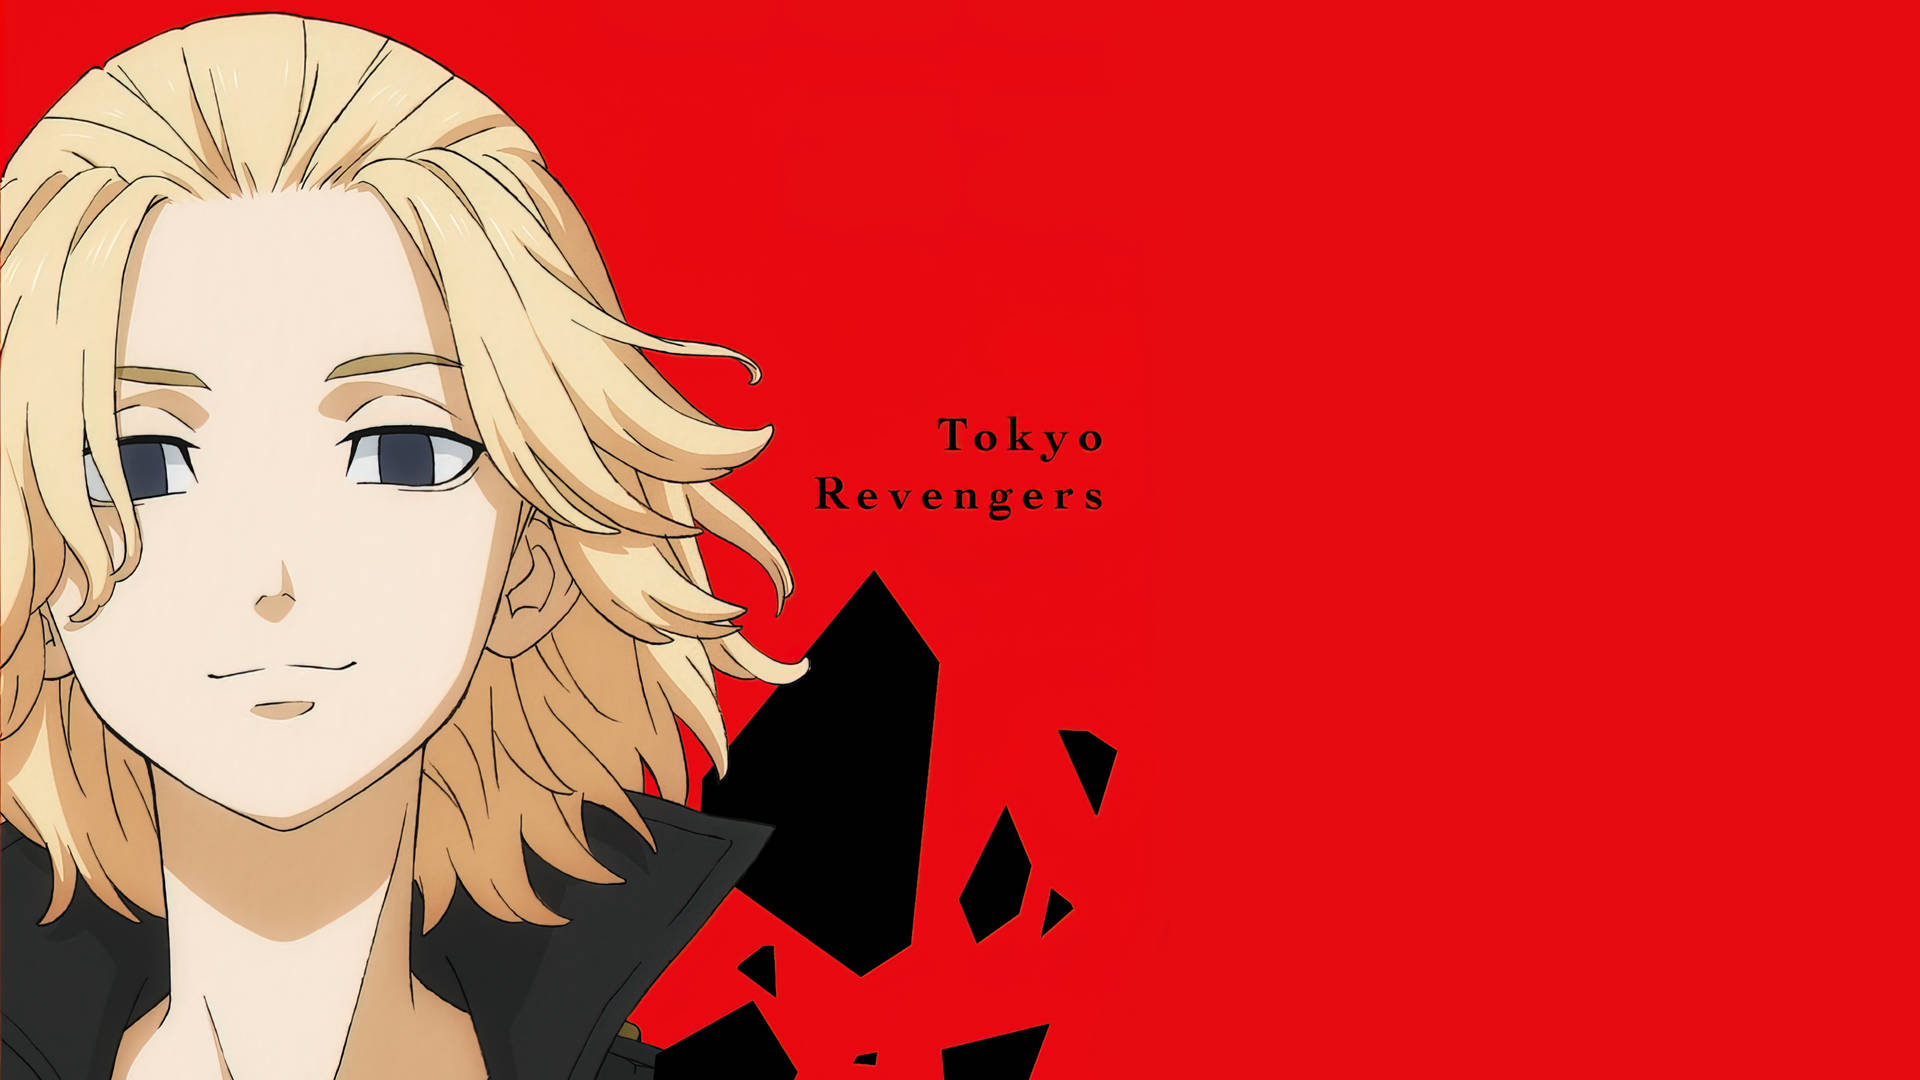 Mikey Tokyo Revengers Red Poster